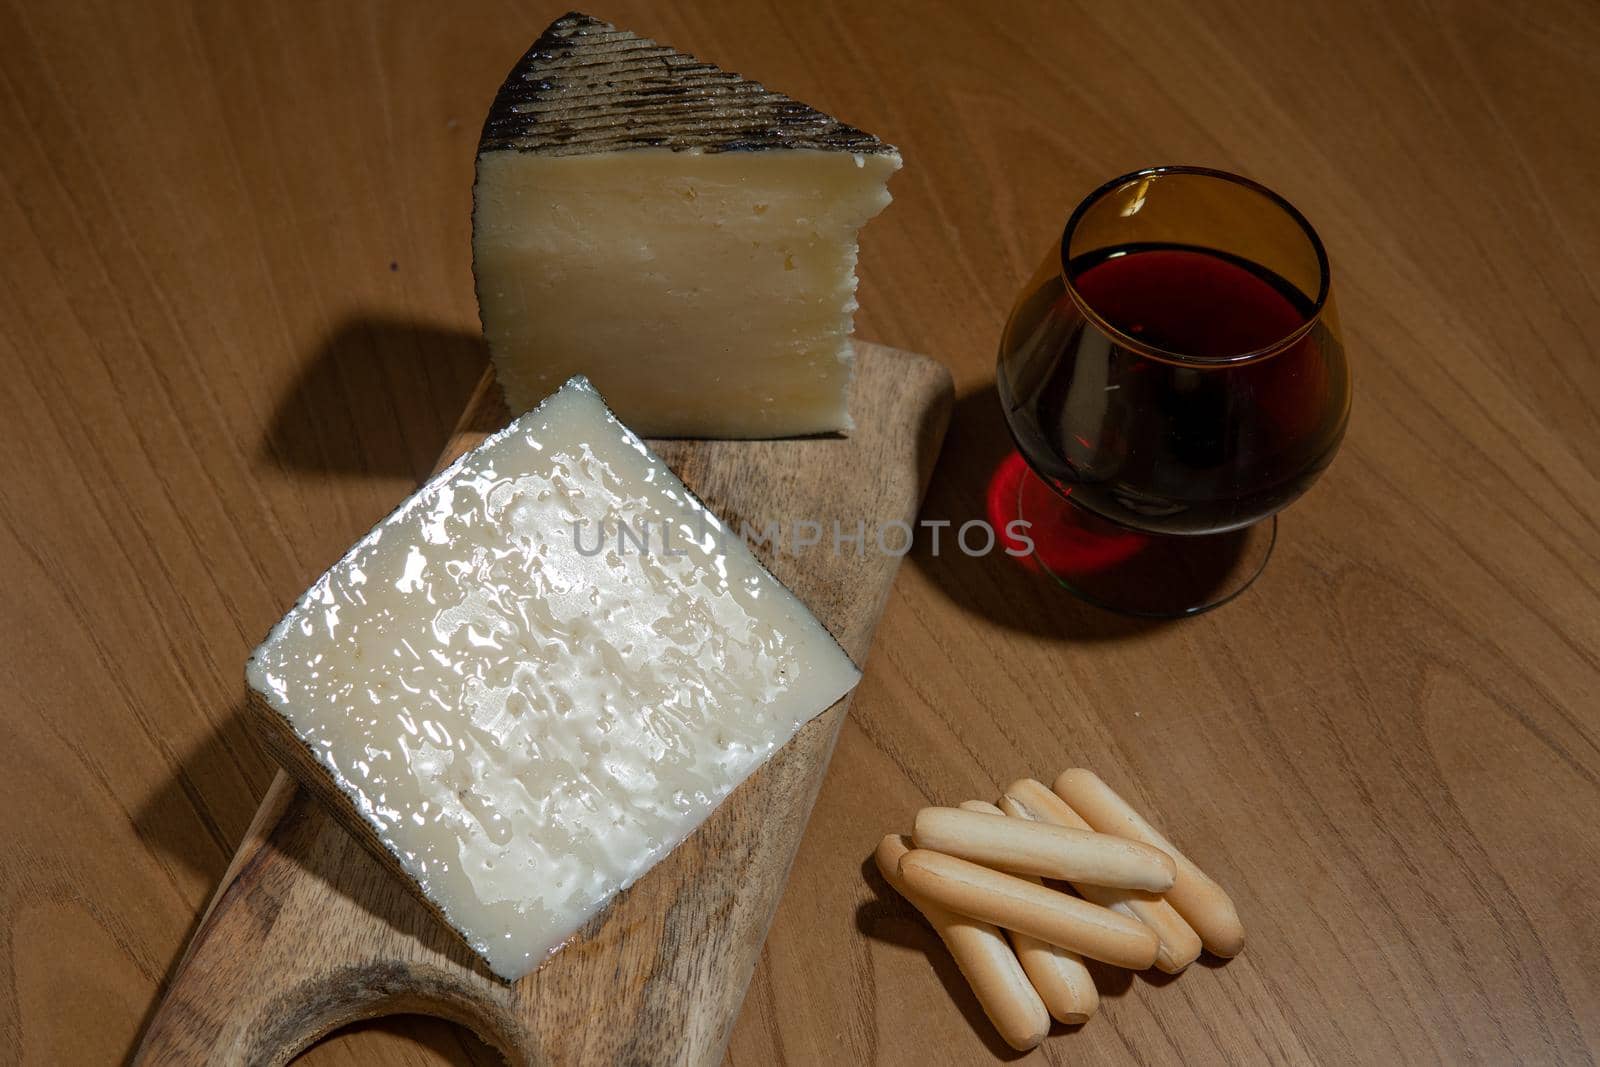 Cheese wedges on wooden board and red wine